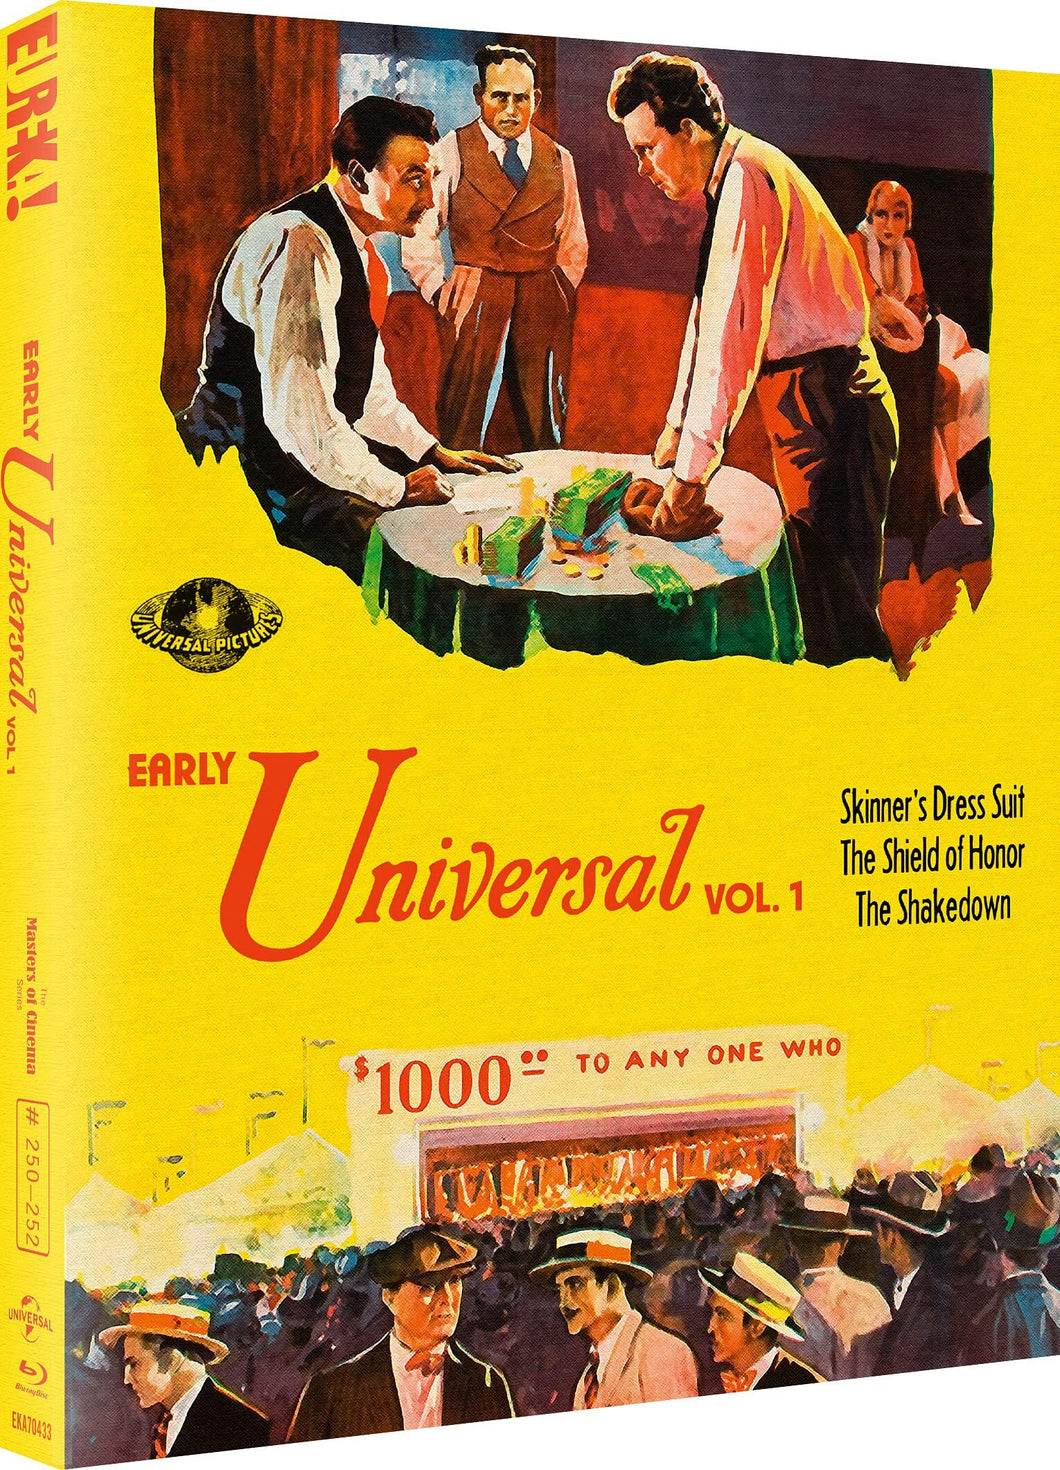 Early Universal Vol. 1 (1926-1929) de William A. Seiter, William Wyler, Emory Johnson - front cover